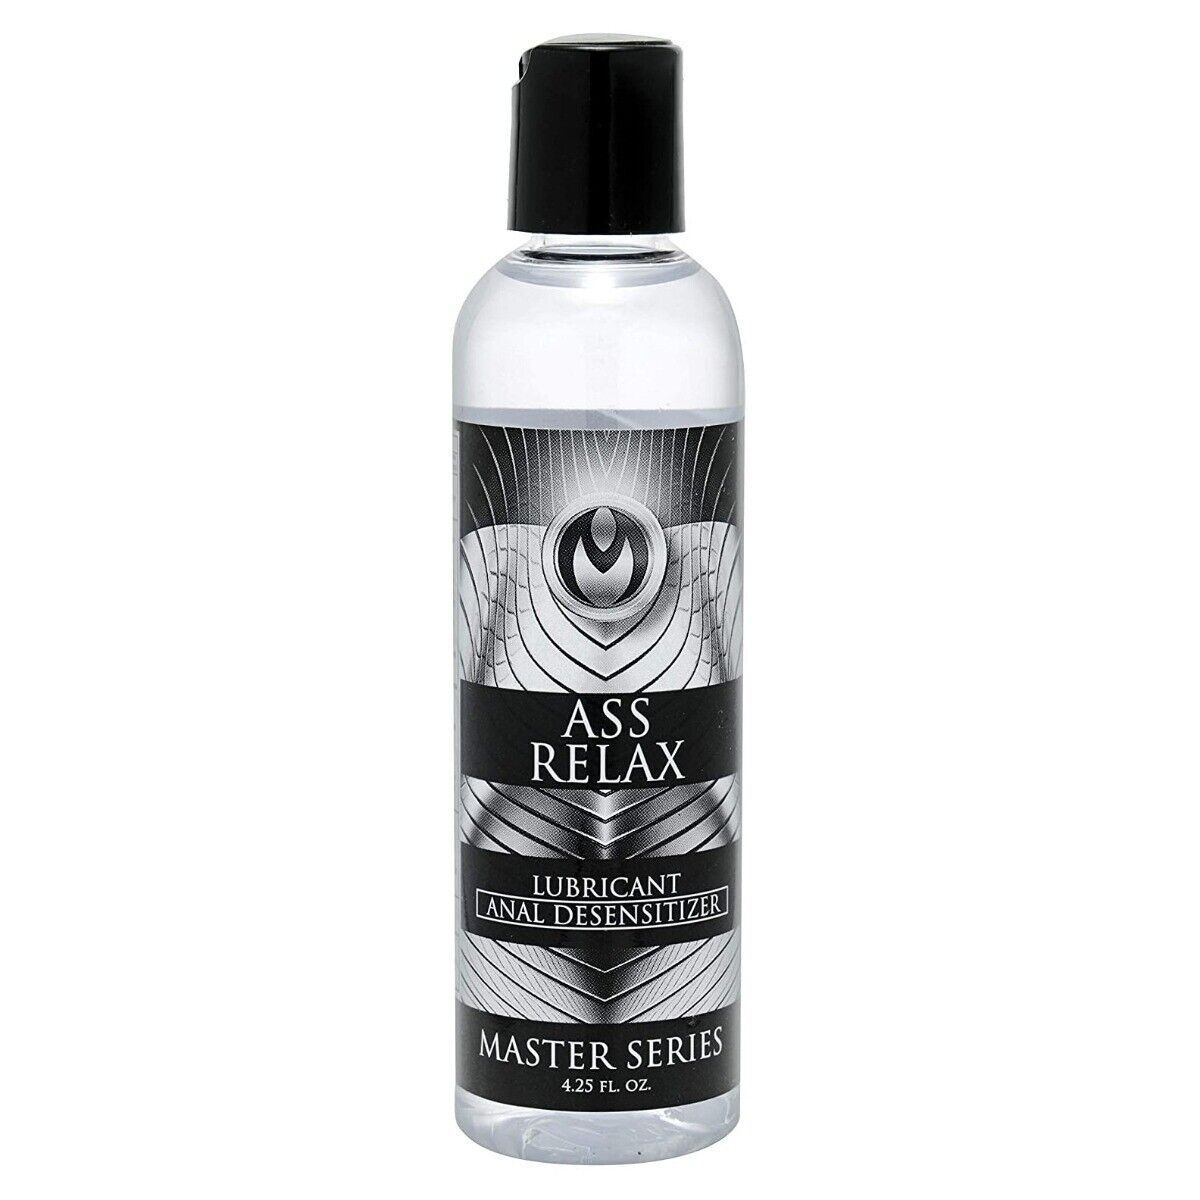 Master Series Ass Relax Desensitizing Numbing Anal Lubricant 4.25 oz